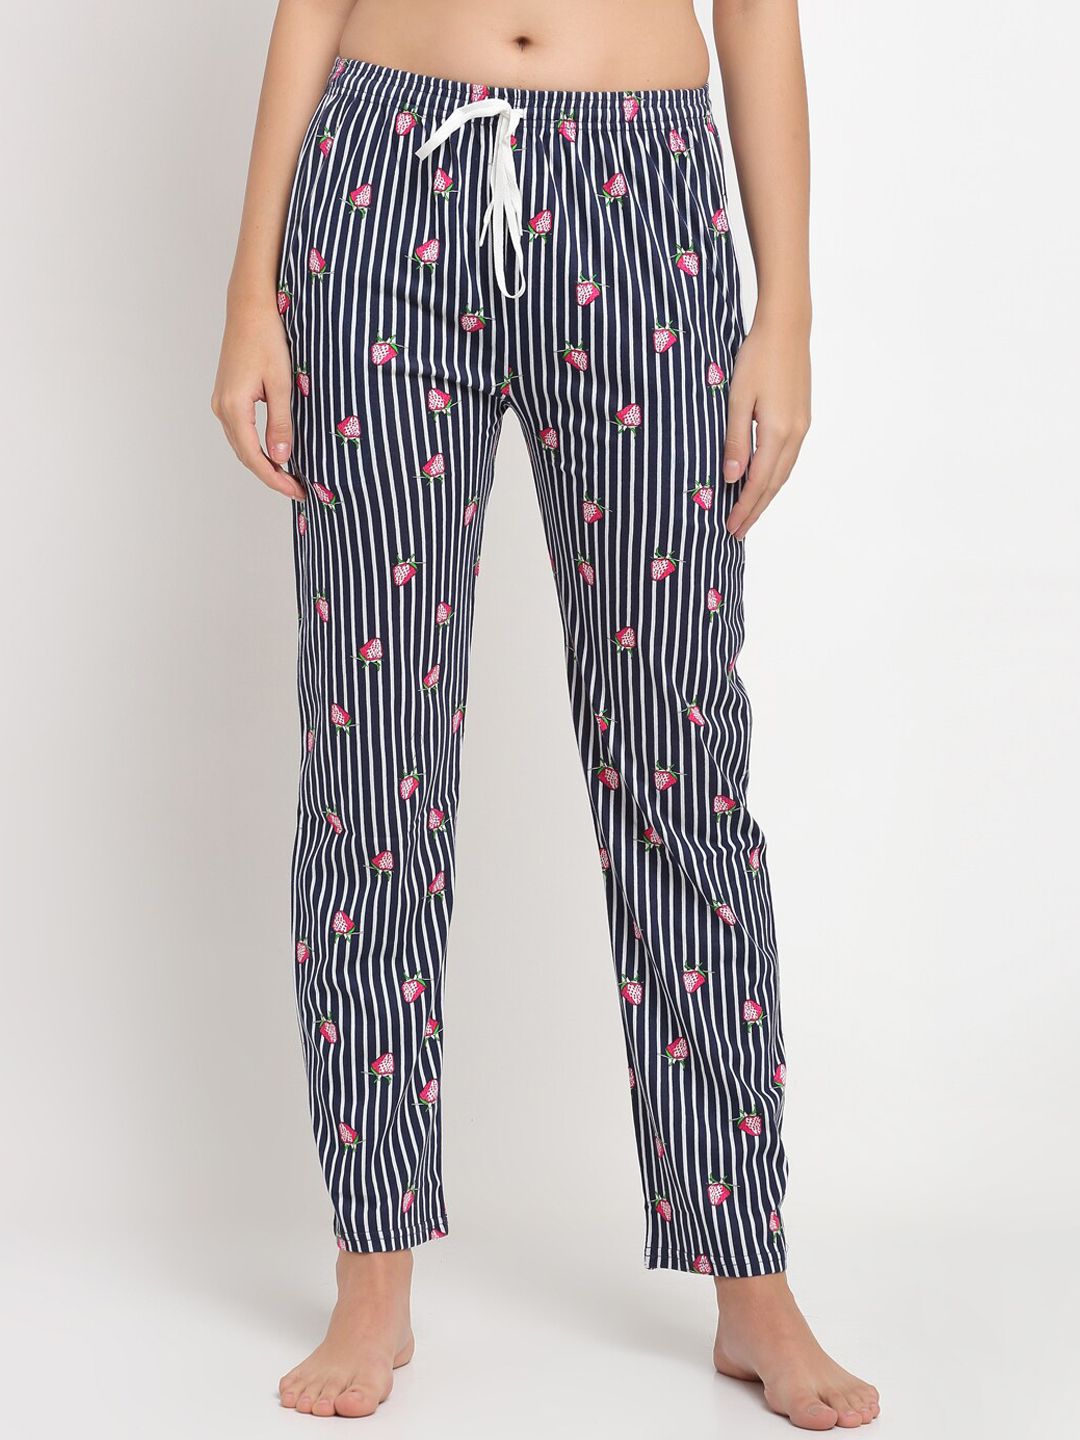 Claura Women Blue & White Printed Lounge Pants Price in India